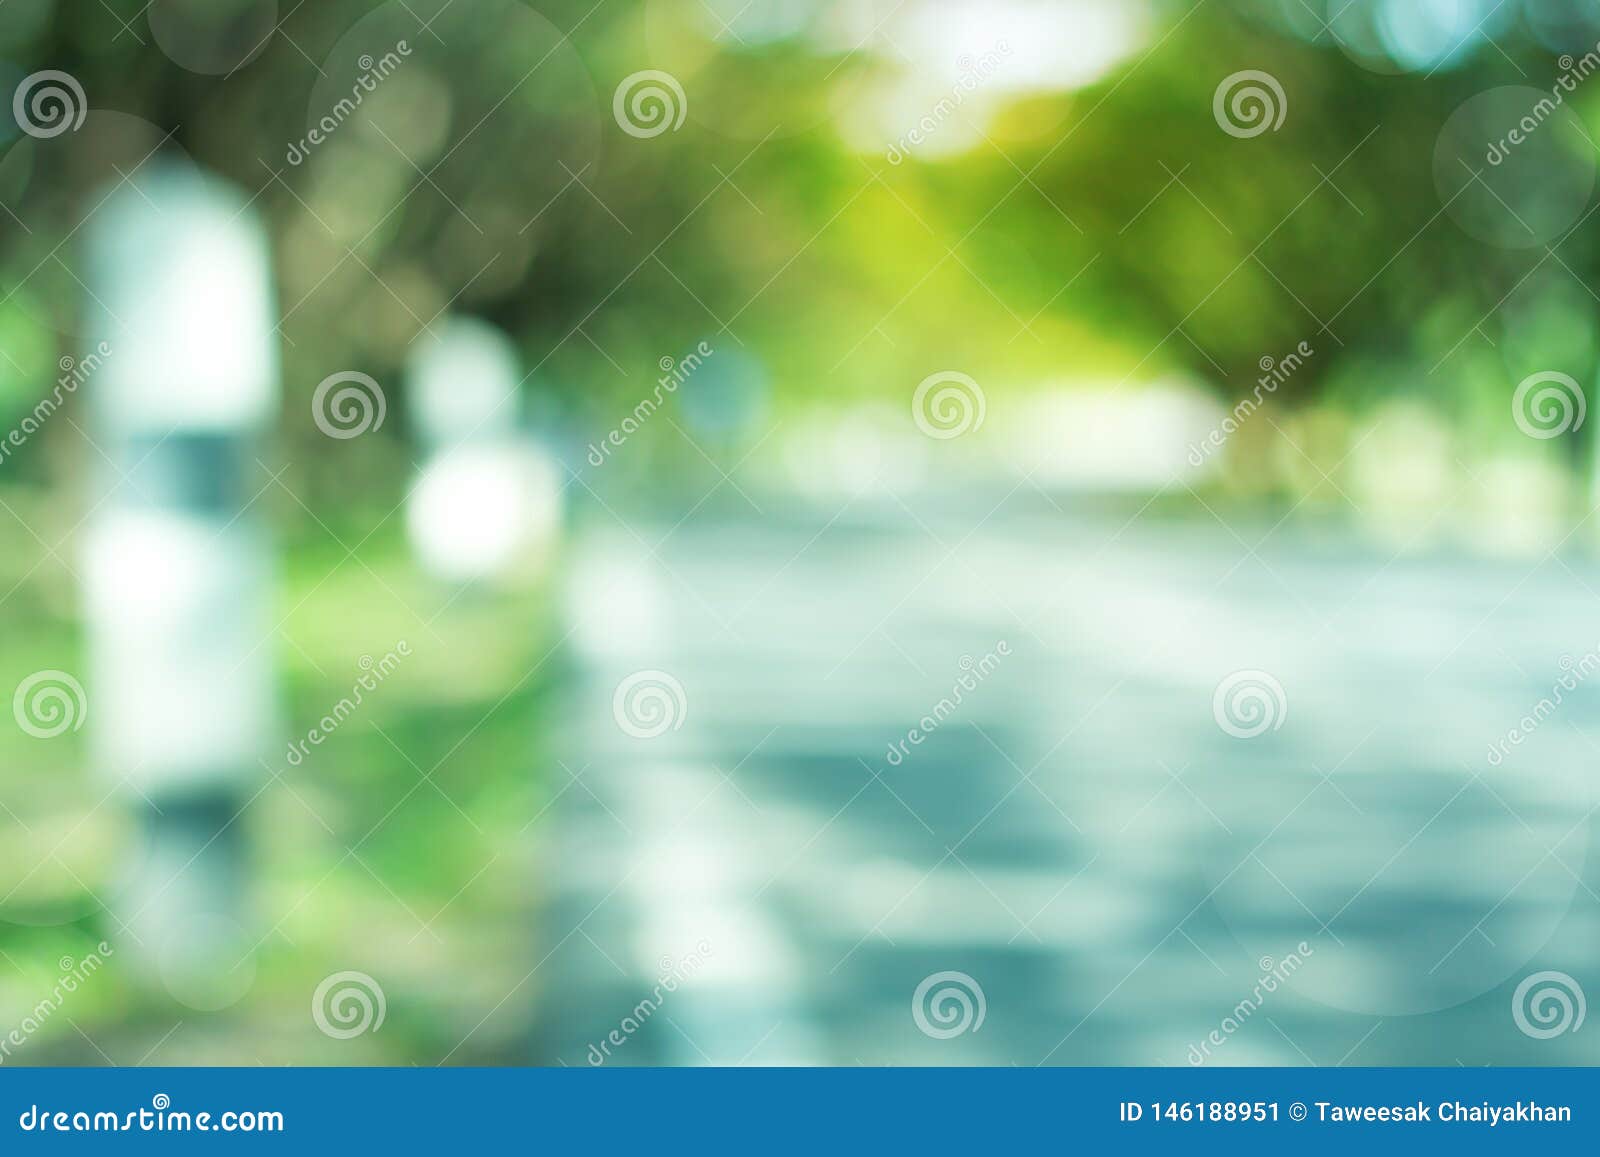 Blur Road and Tree in Nature Background Stock Image - Image of ...